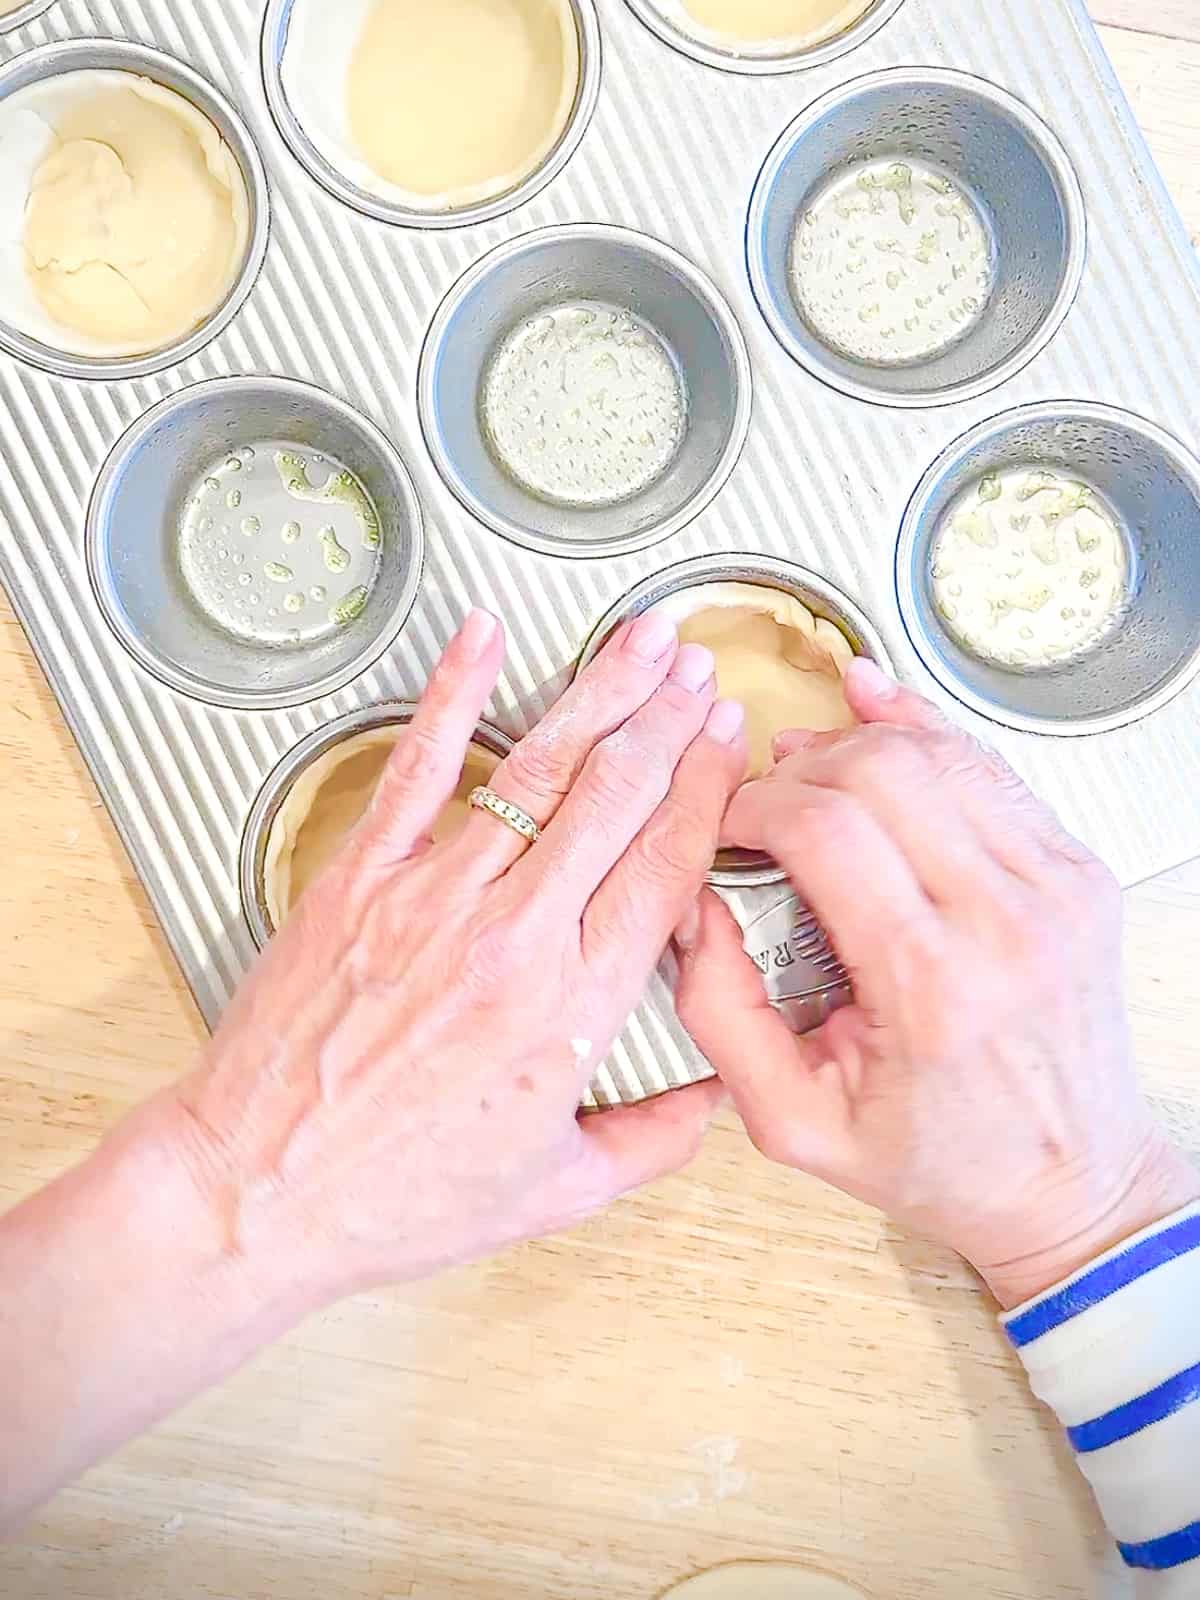 Primal discs of pie dough into the well of a muffin pan.